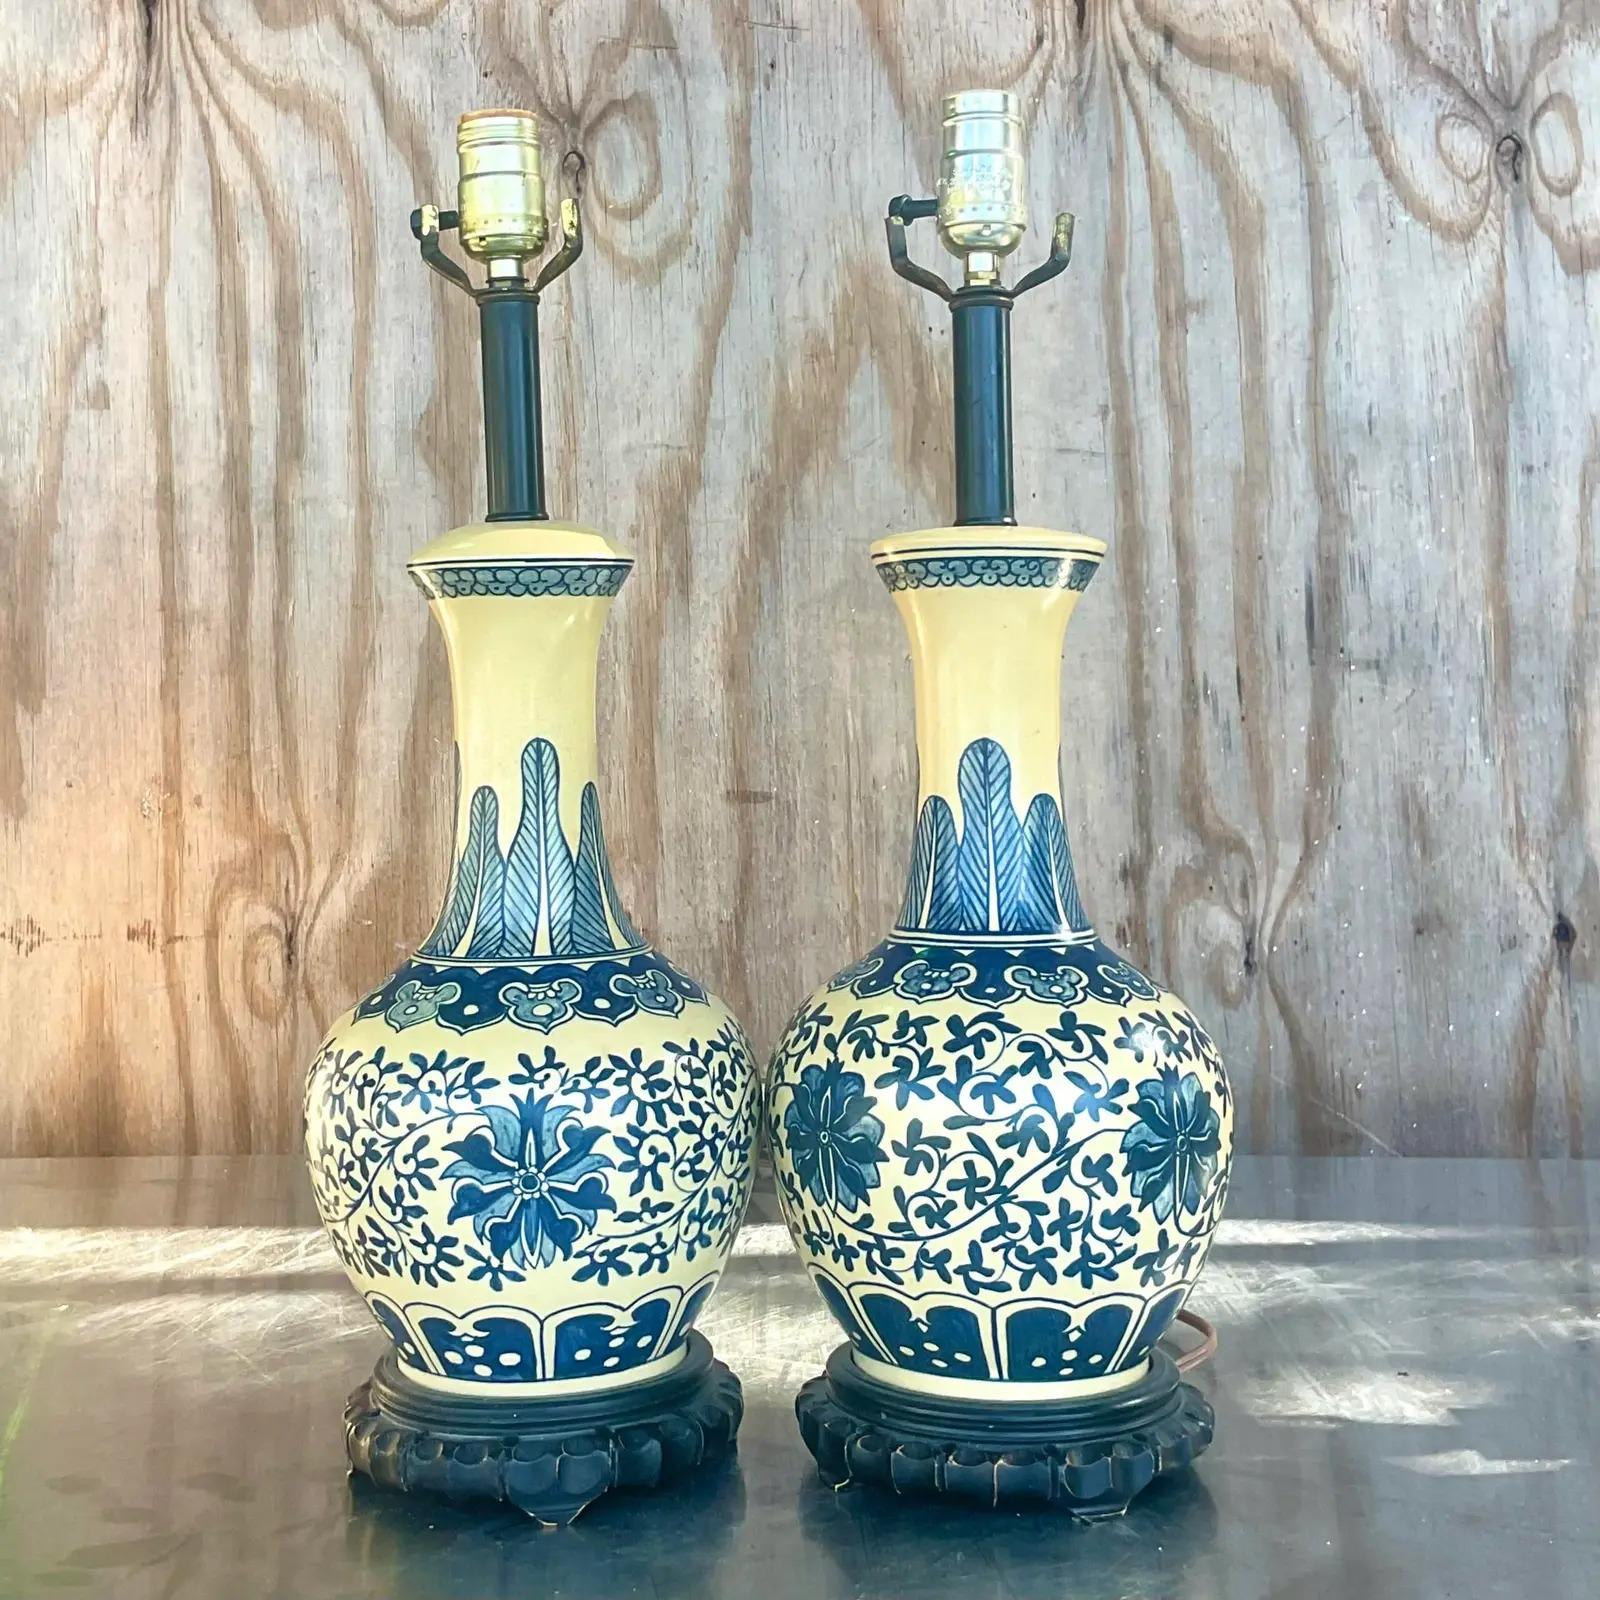 Ceramic Vintage Boho Chic Hand Painted Gourd Lamps - a Pair For Sale